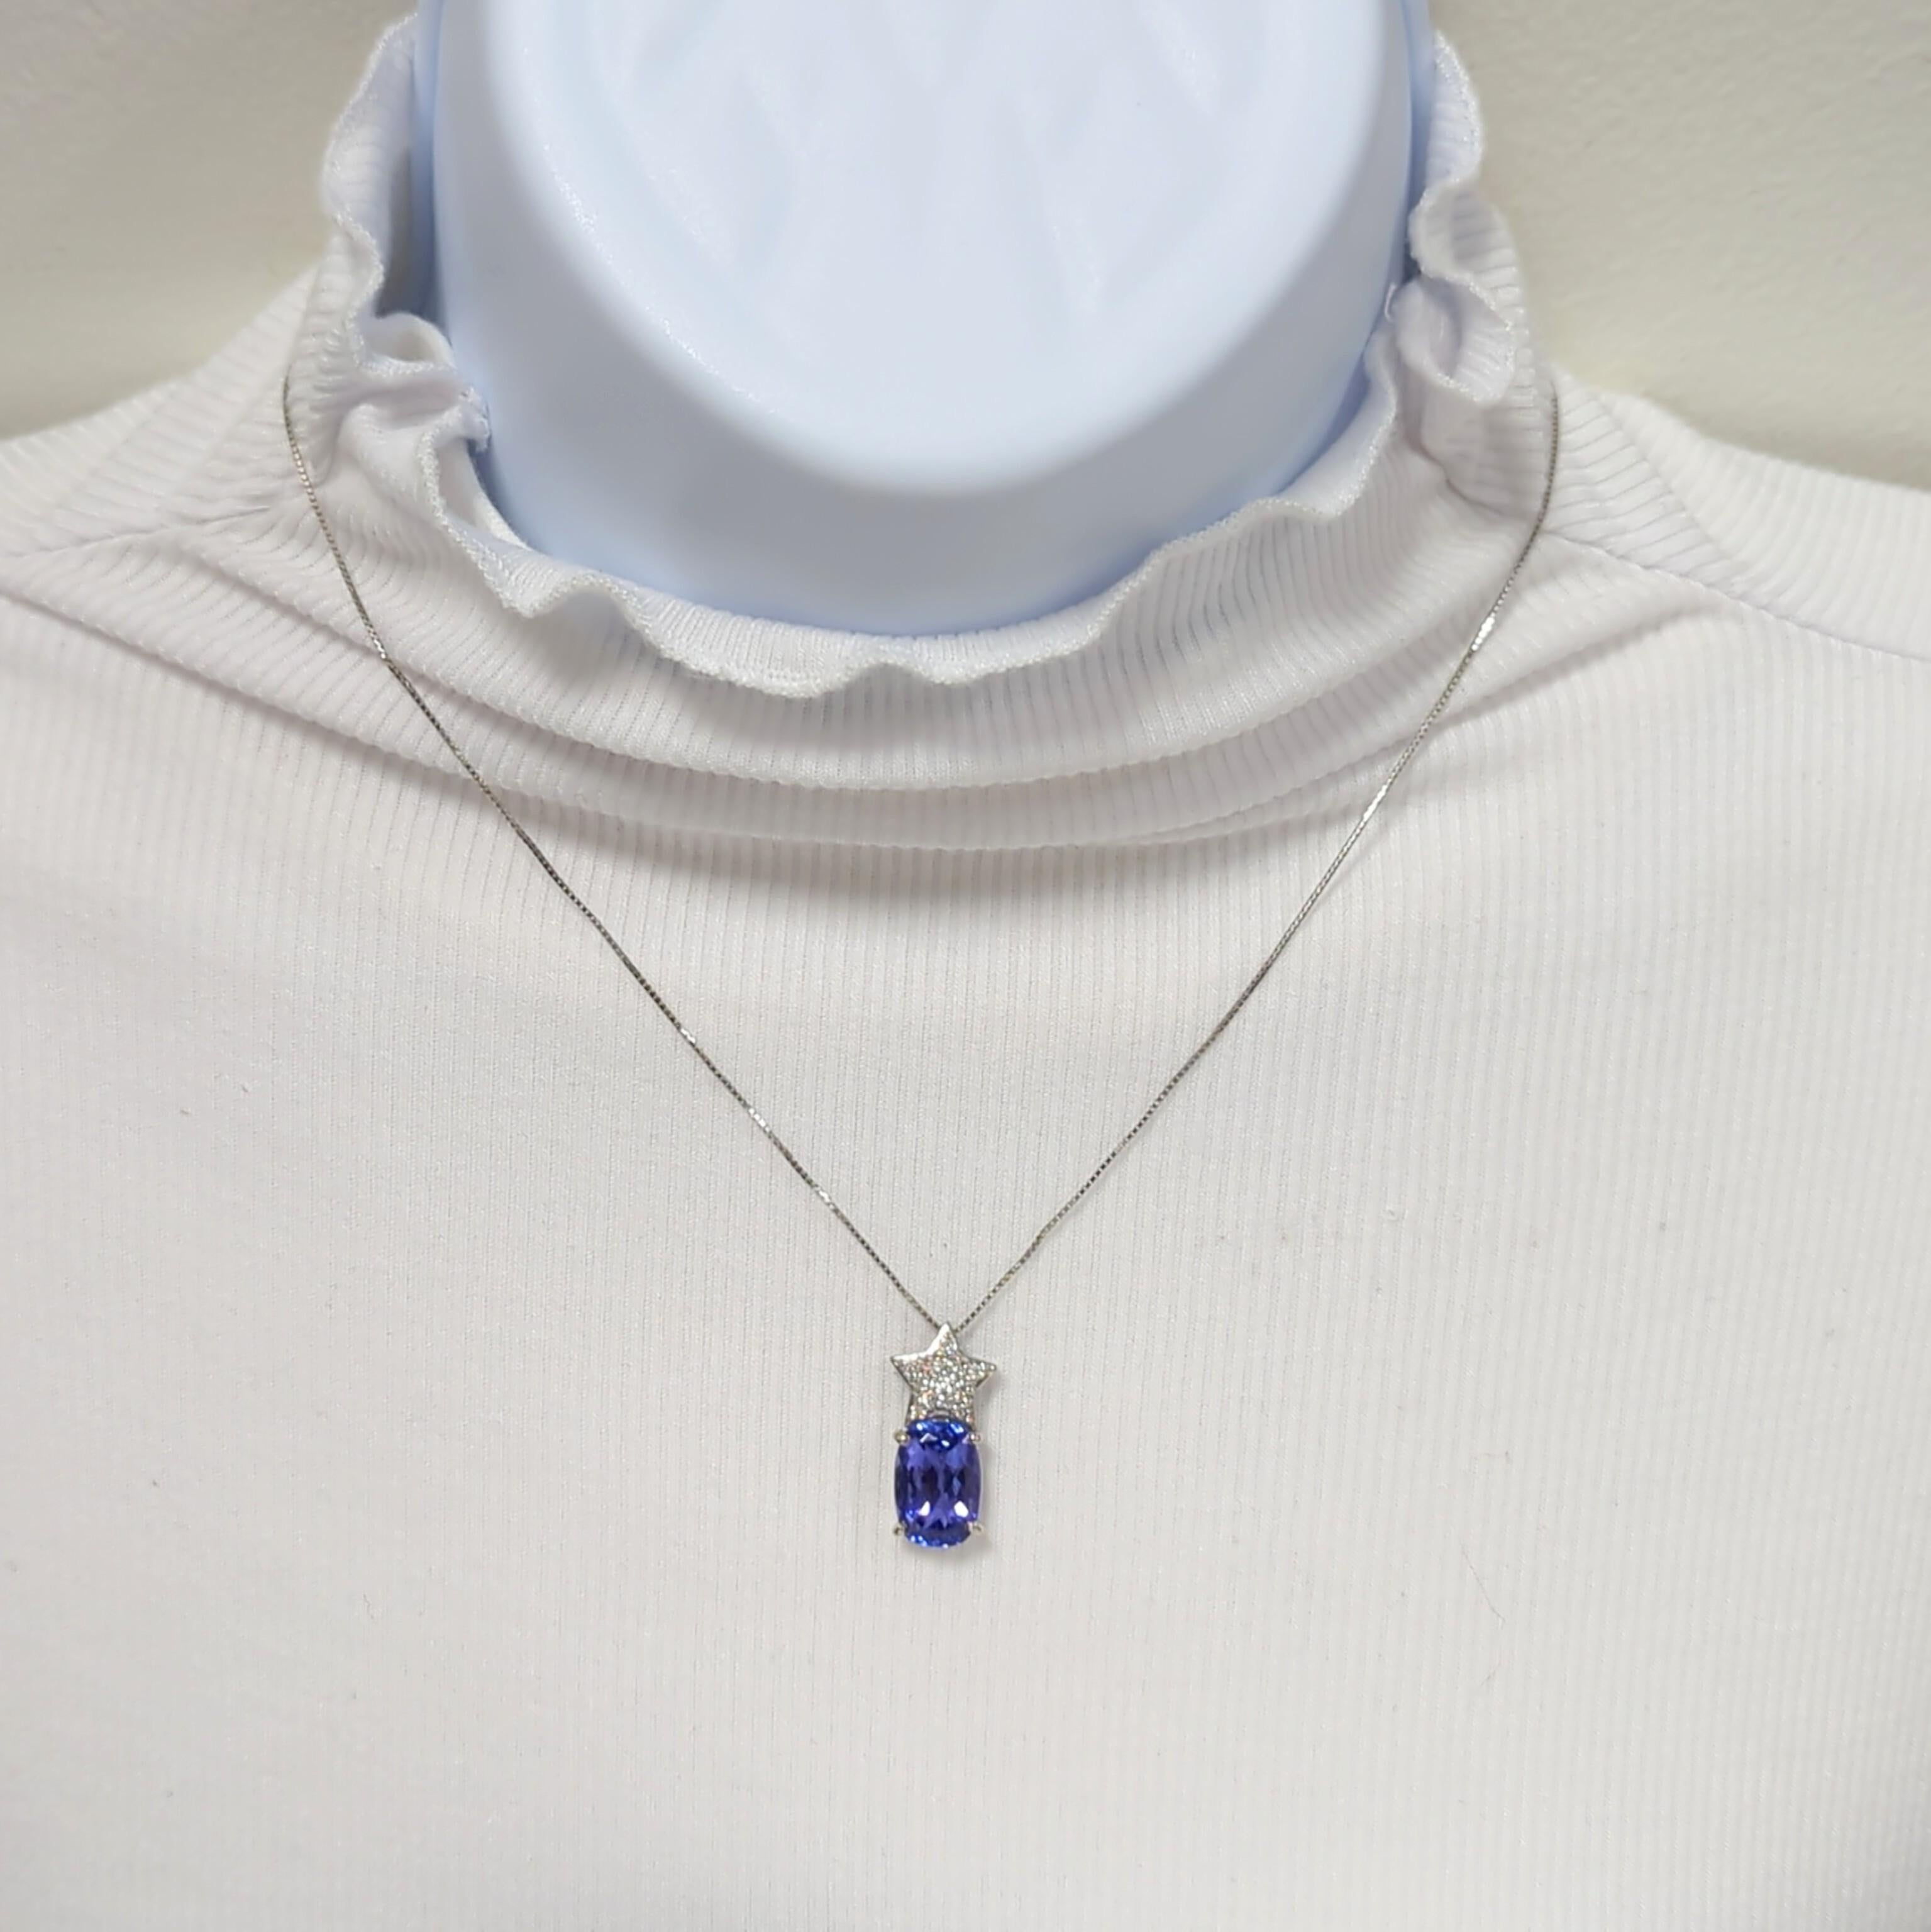 Gorgeous deep color tanzanite oval weighing 5.45 ct. with 0.25 ct. pave white diamonds.  Handmade platinum mounting.  Length is 19